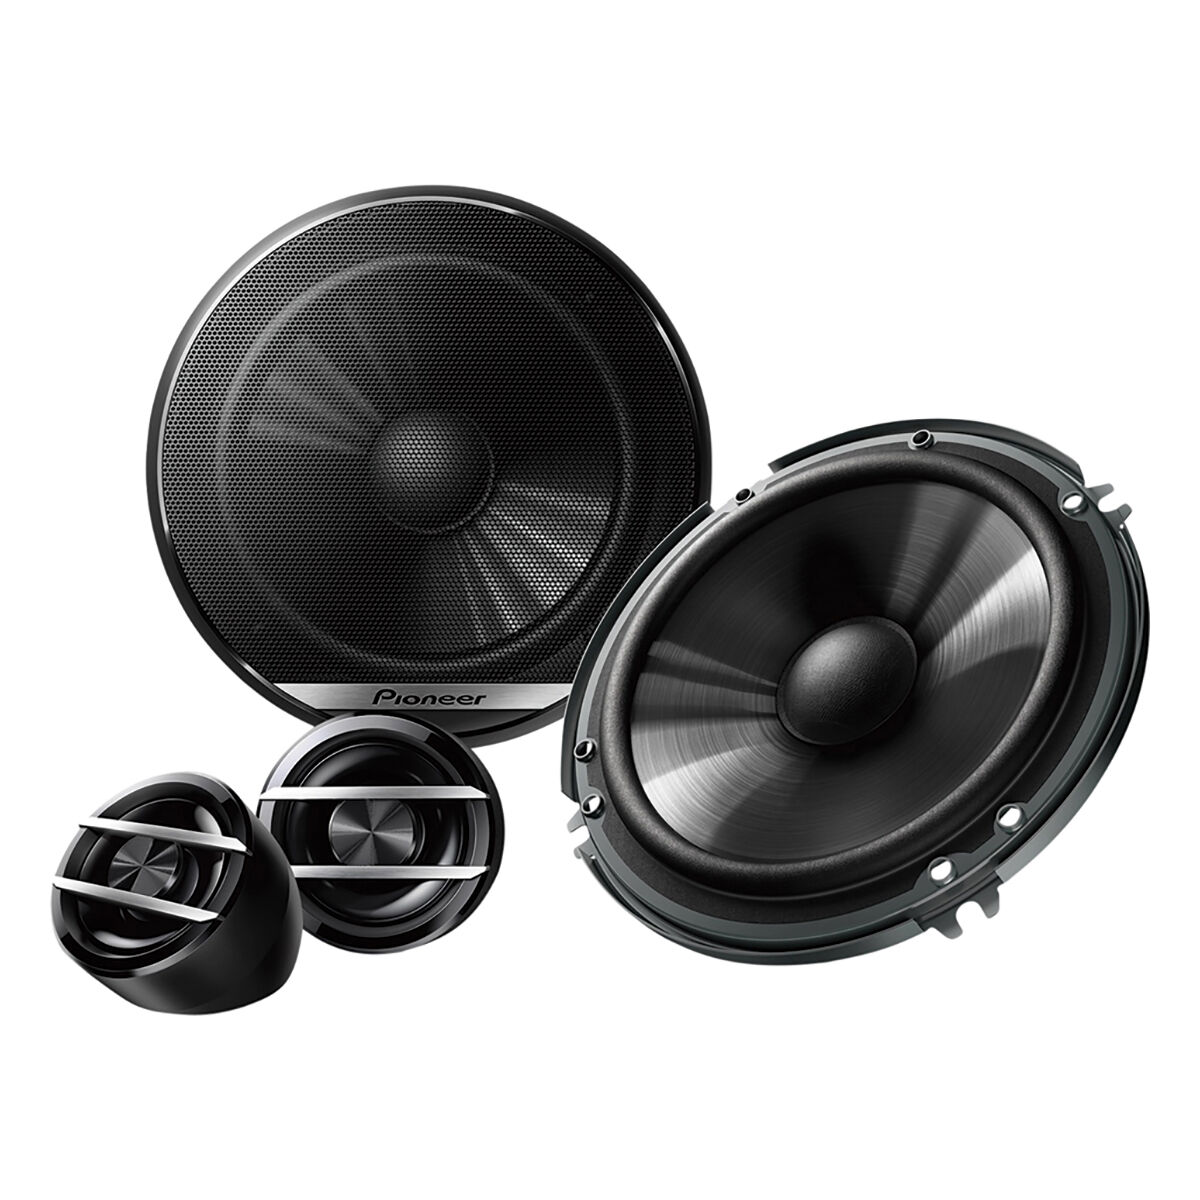 Trouw helemaal Getand Pioneer 6 Inch Component Speaker Set TS-G160C-2 | Supercheap Auto